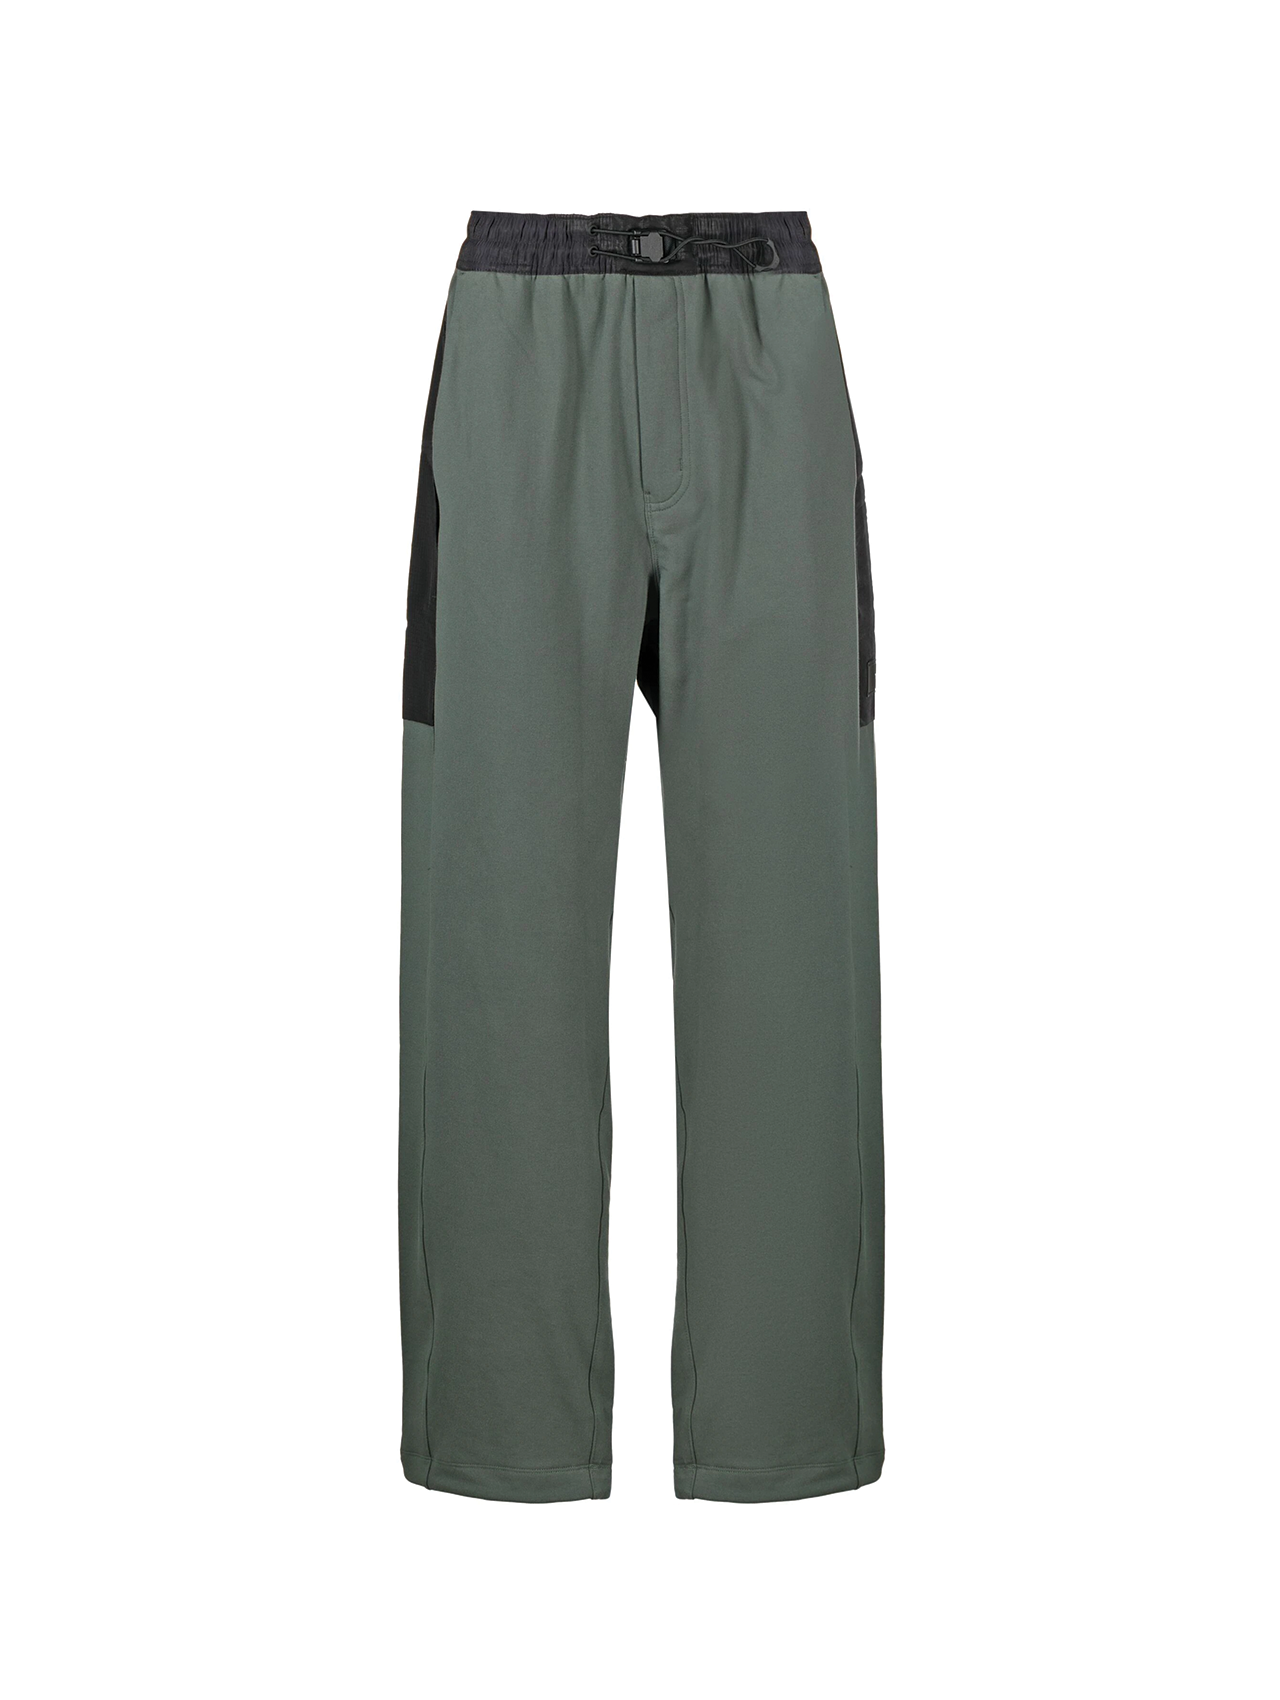 Y-3 Ivy Green Stretch Terry Pants